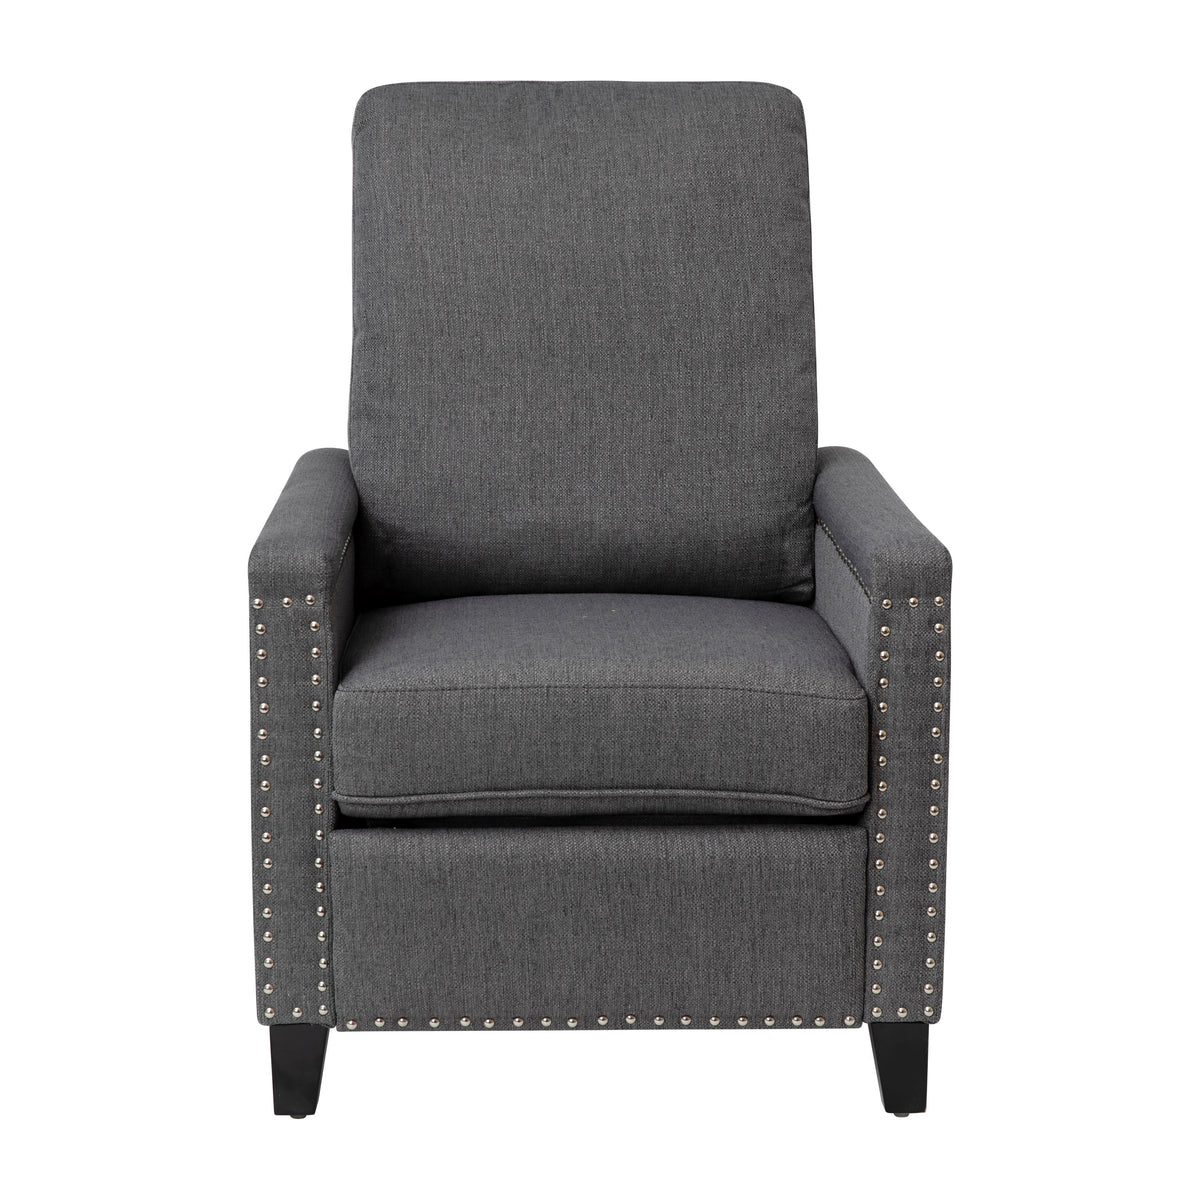 Gray |#| Push Back Recliner with Pillow Style Backrest and Accent Nail Trim - Gray